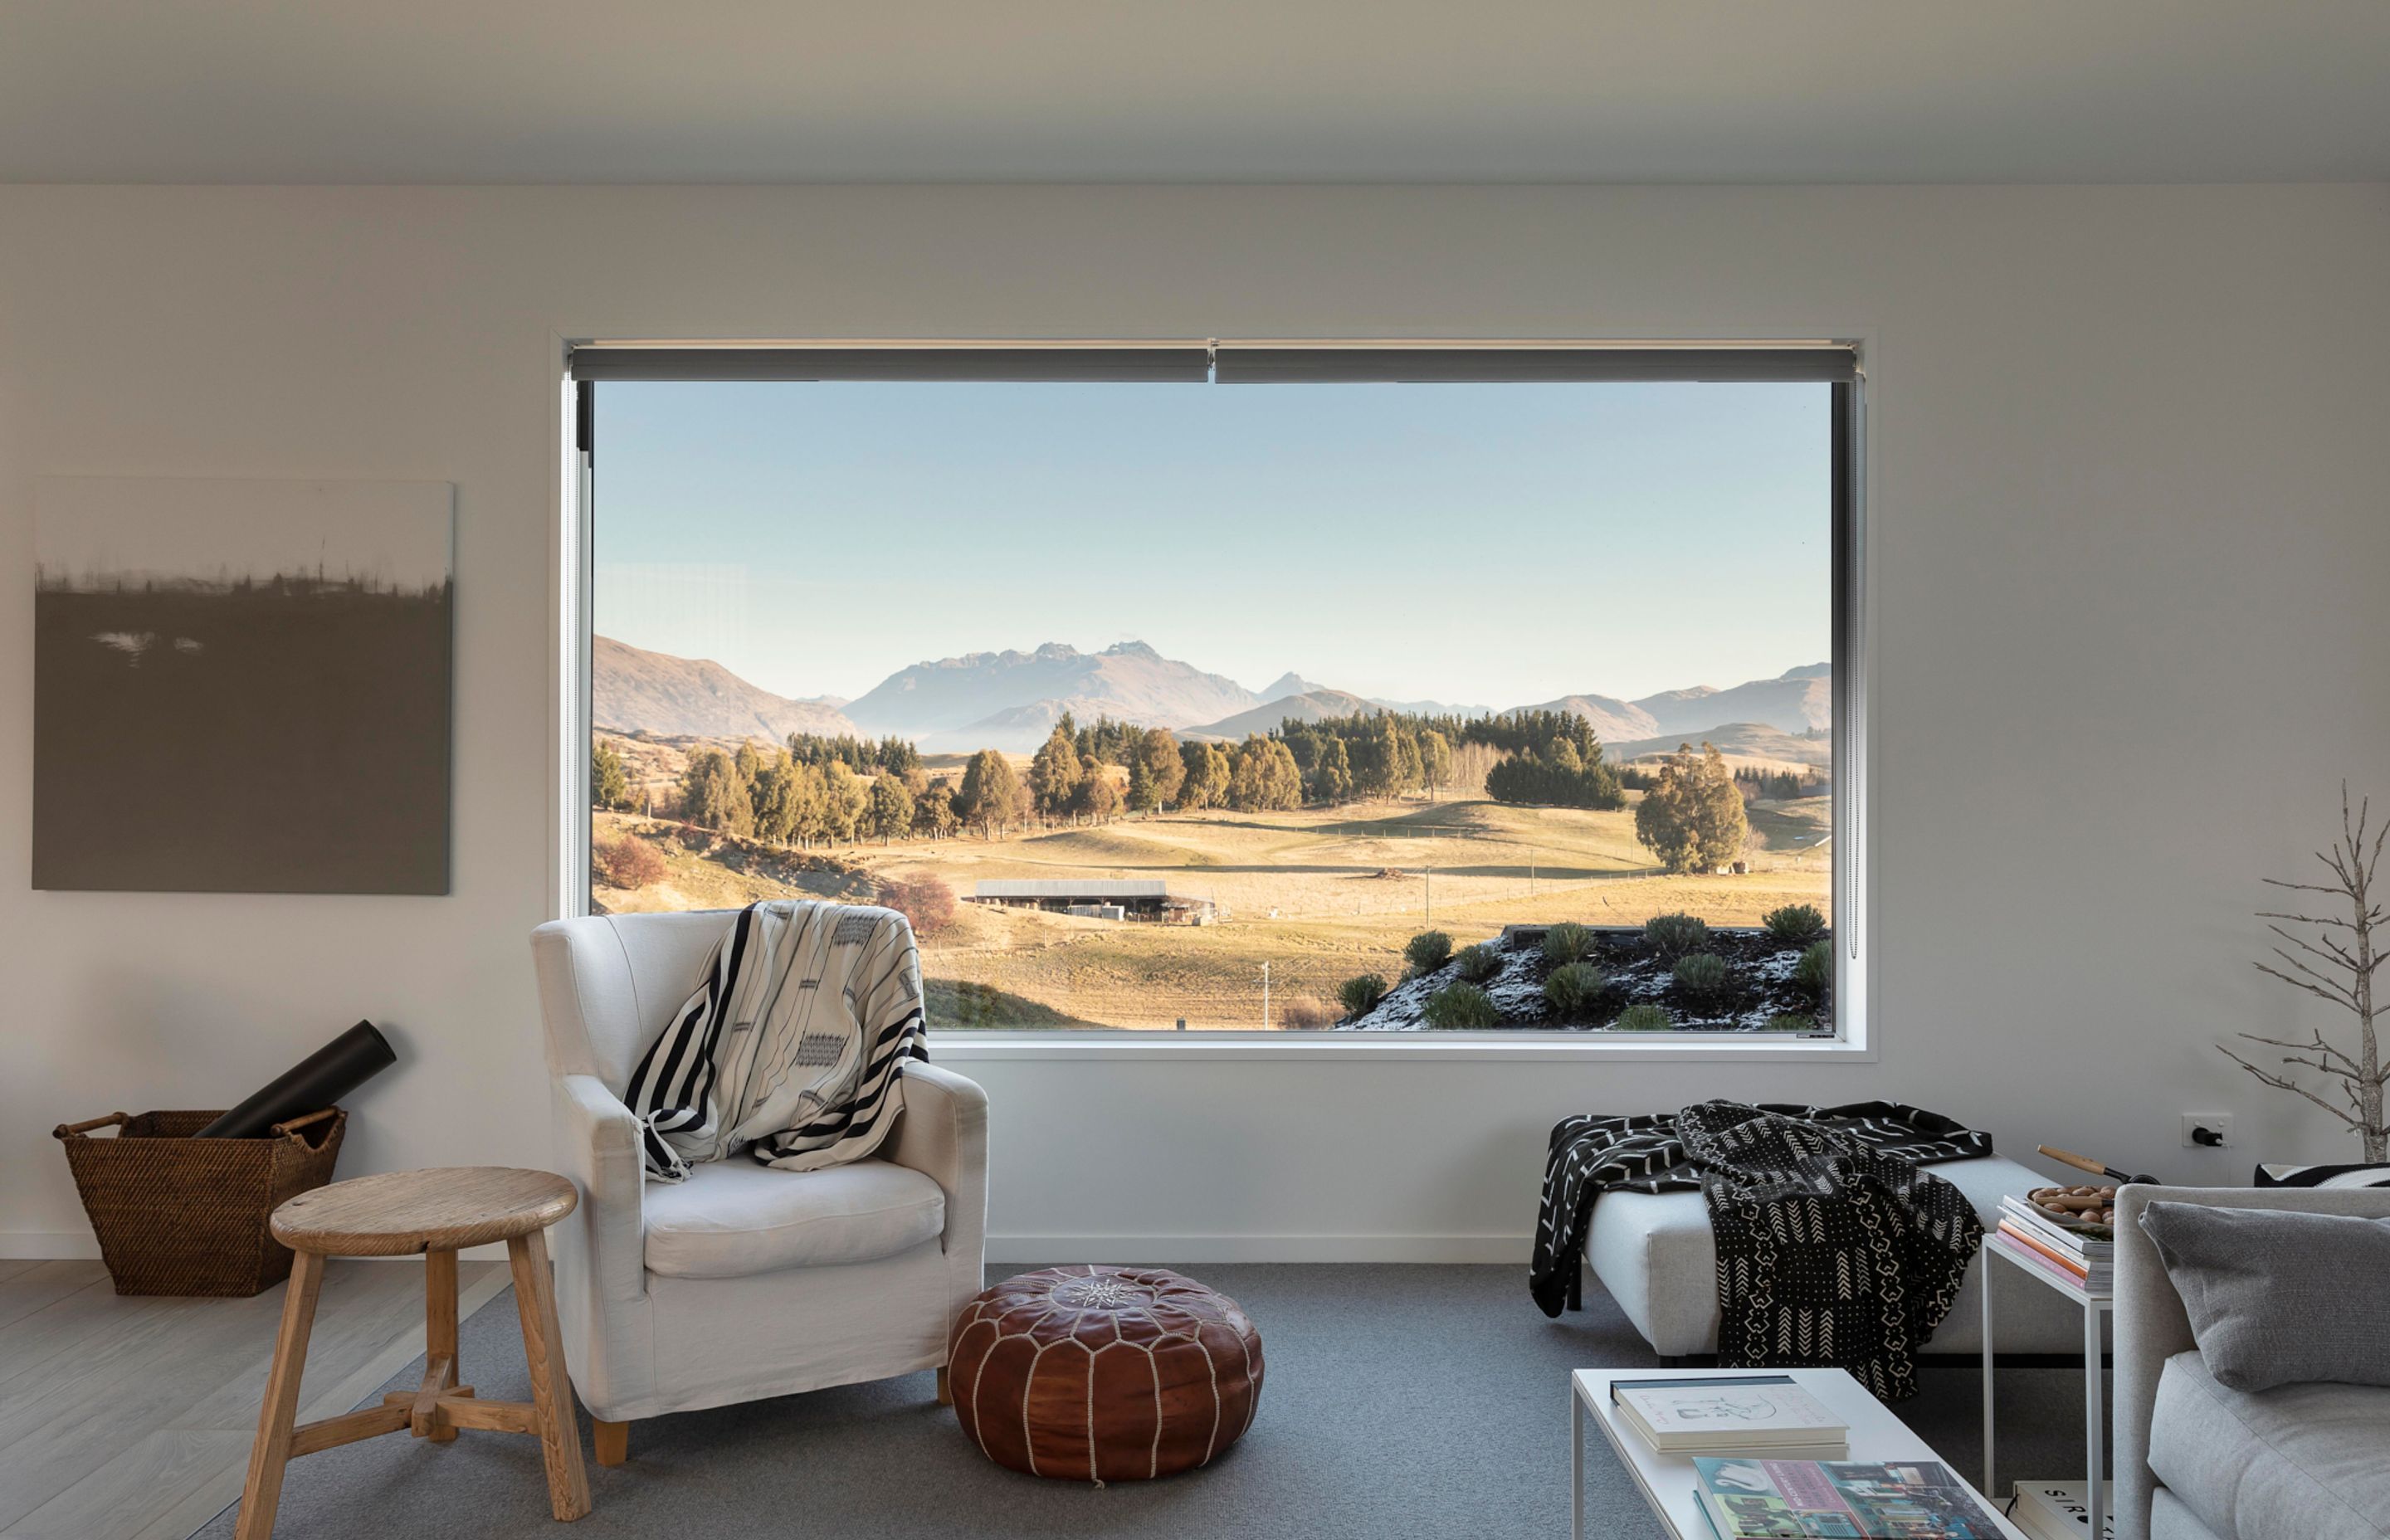 Windows are placed as artfully as paintings throughout the home and capture stunning picturesque views.